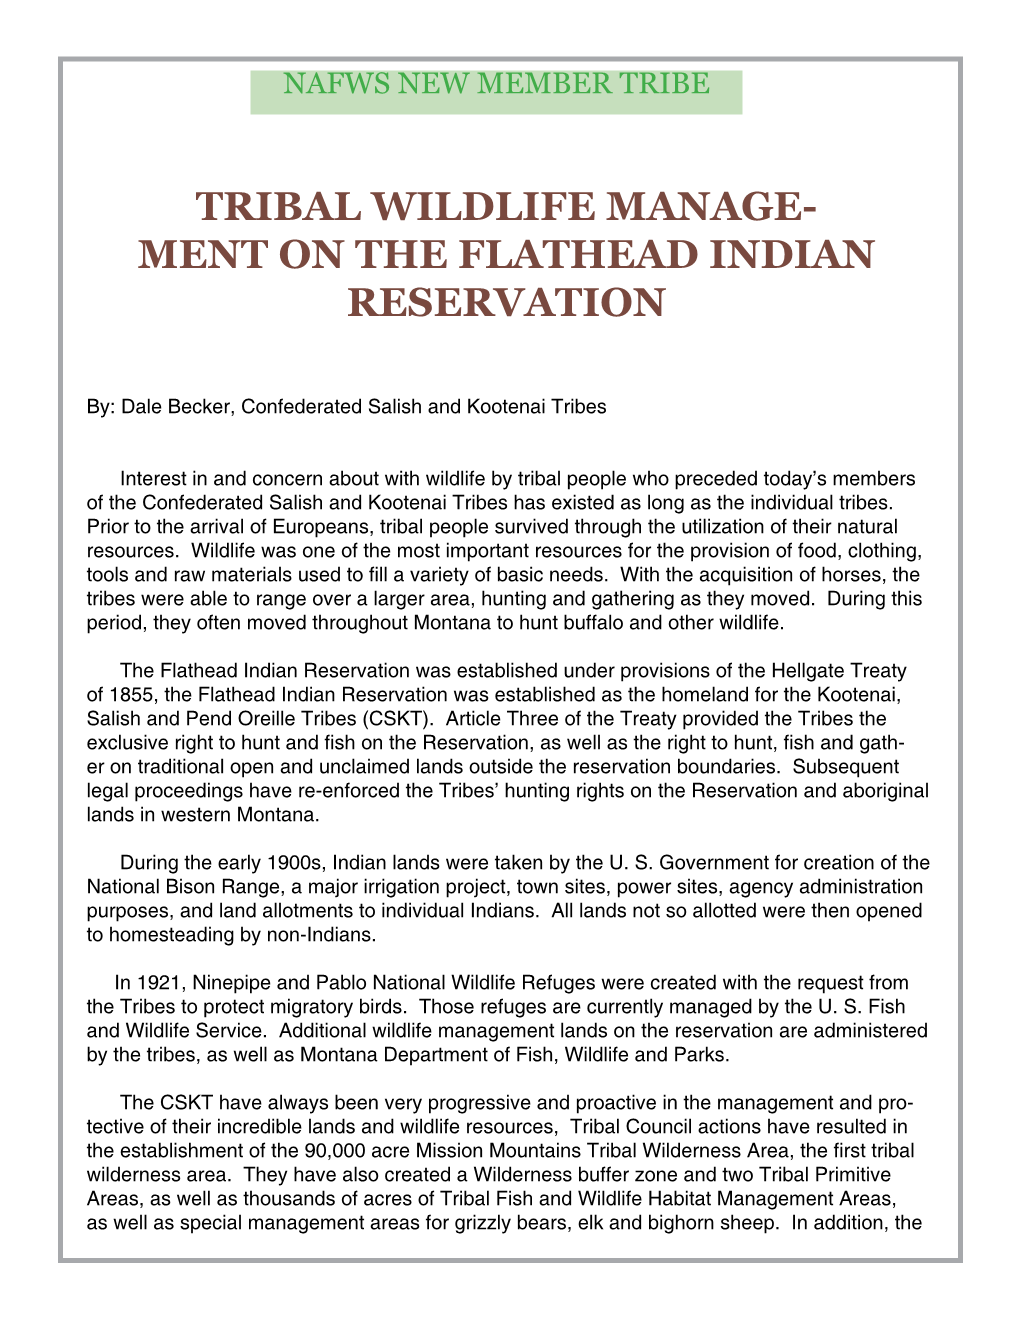 Tribal Wildlife Management on the Flathead Indian Reservation